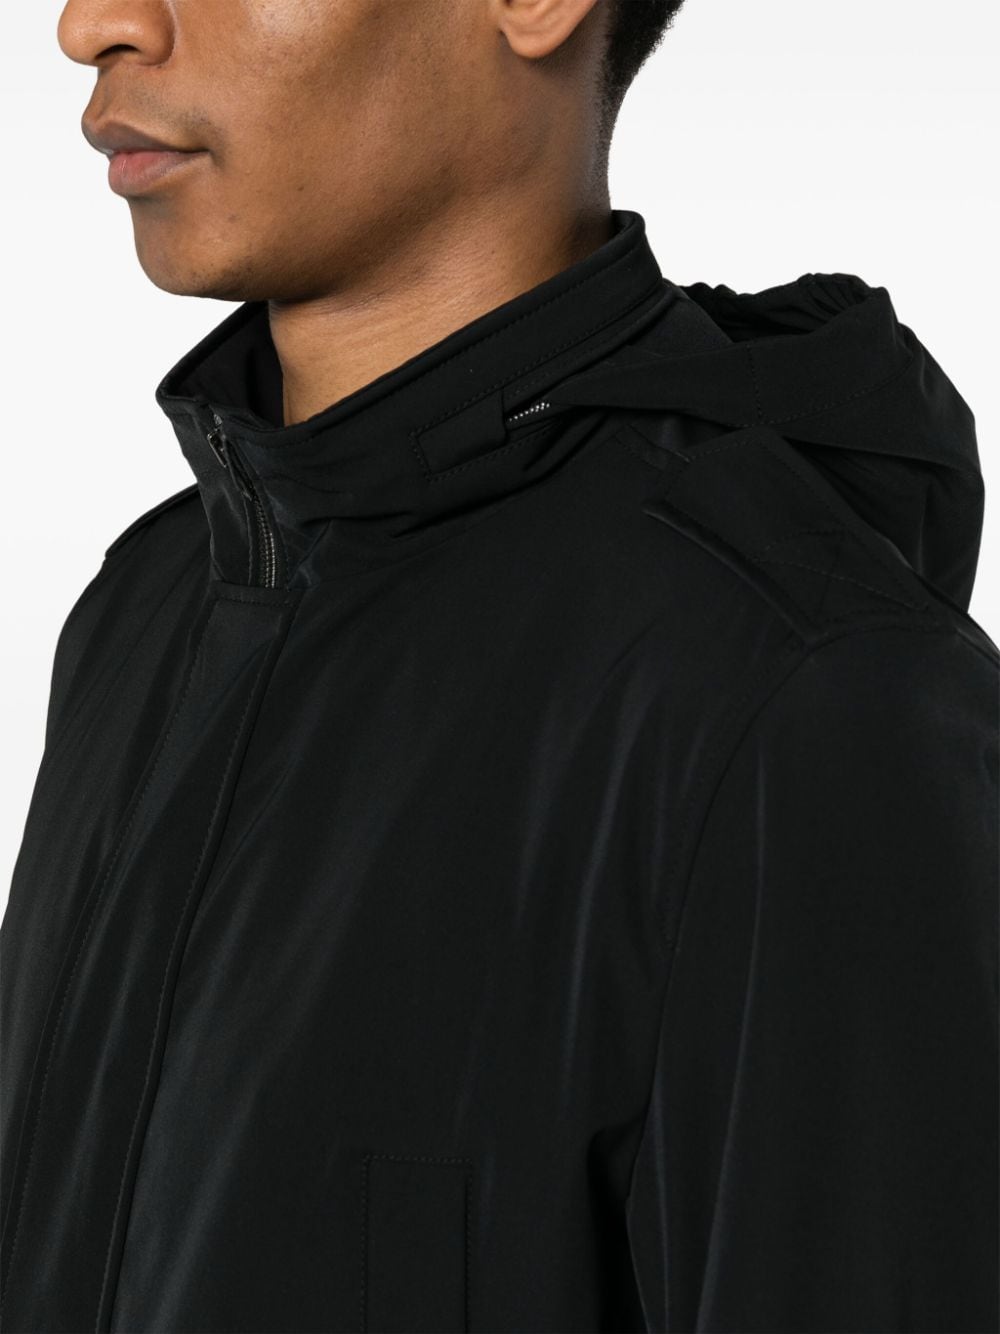 City Life Field hooded jacket<BR/><BR/>